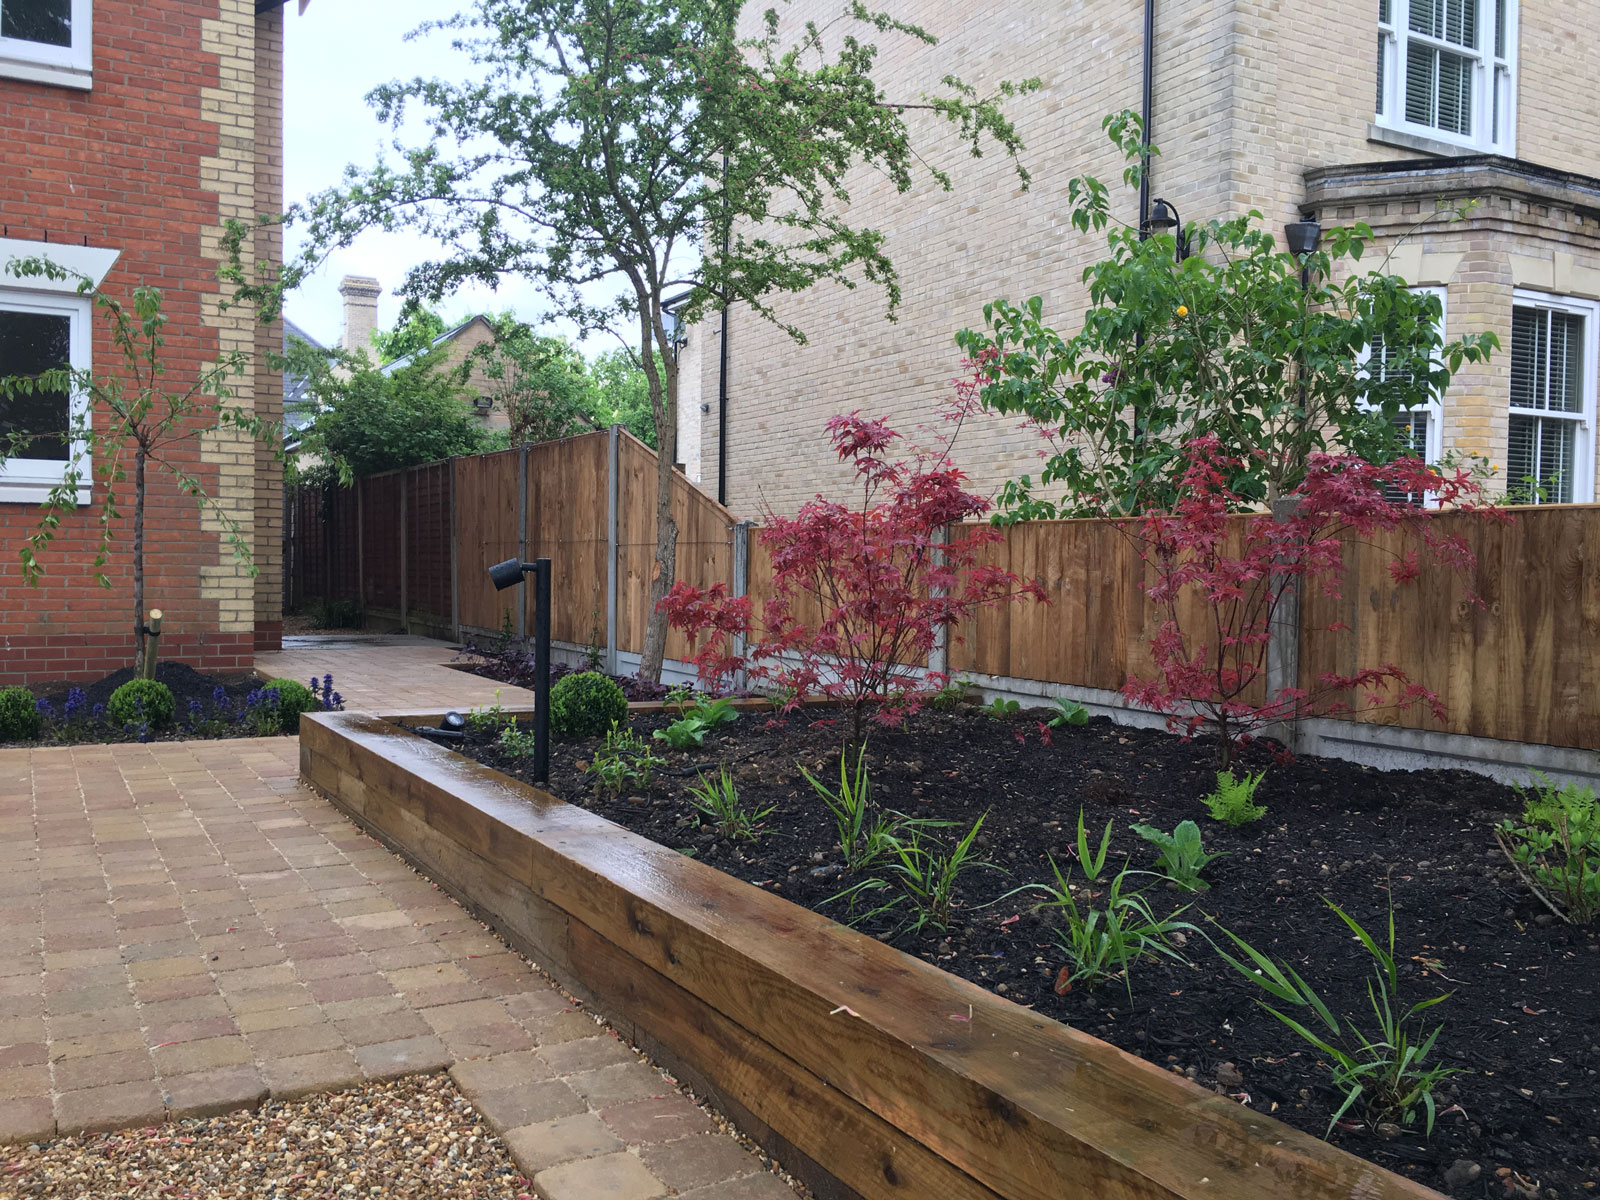 raised beds constructed from sleepers and planted with acer and iris. Stick light in one corner